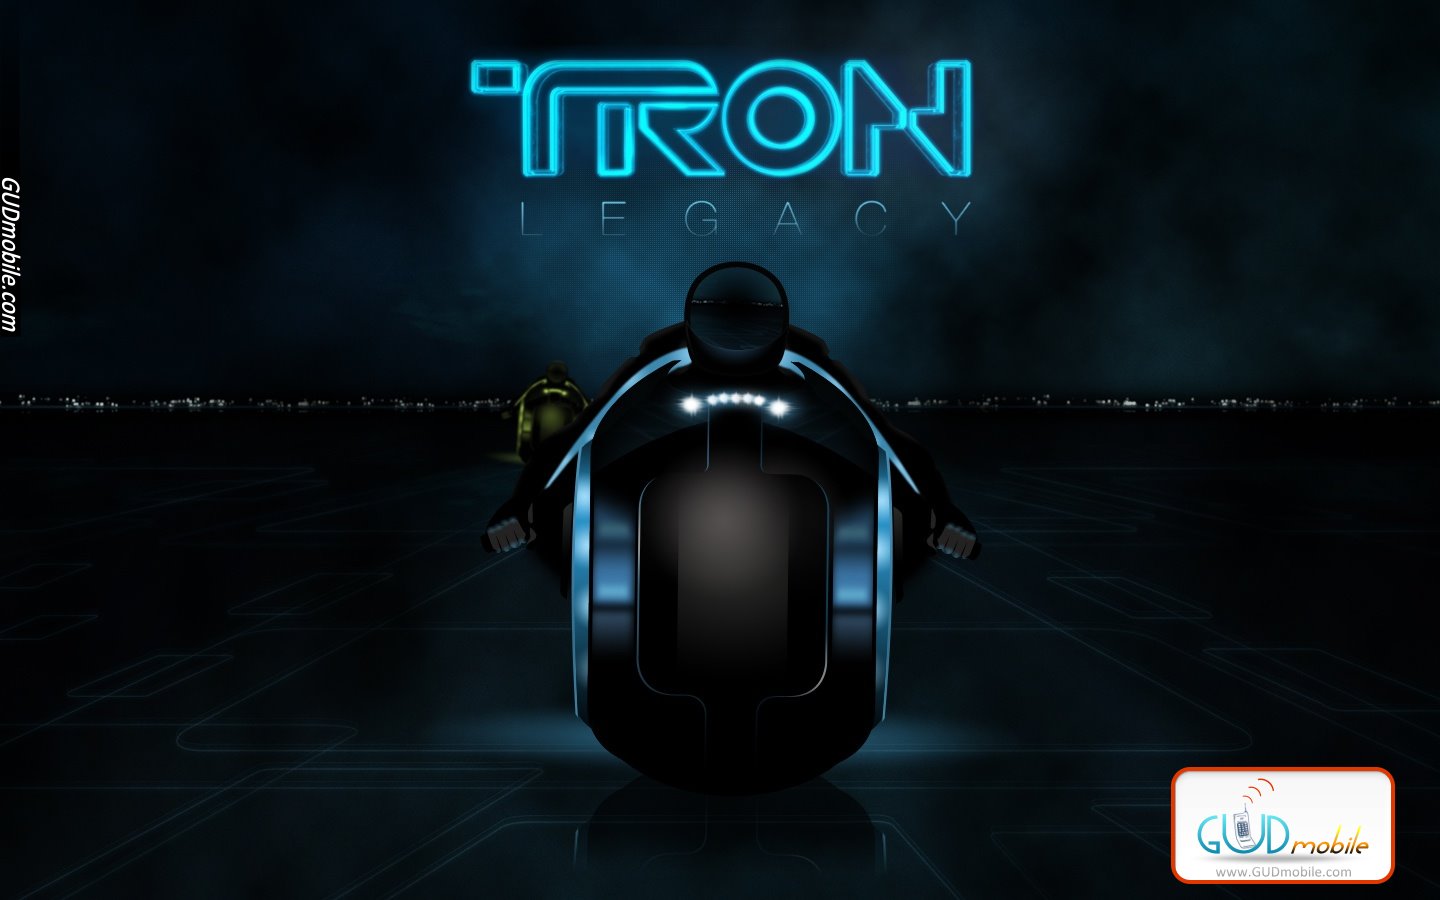 Tron Legacy Poster HD High Resolution Wallpapers and Pictures